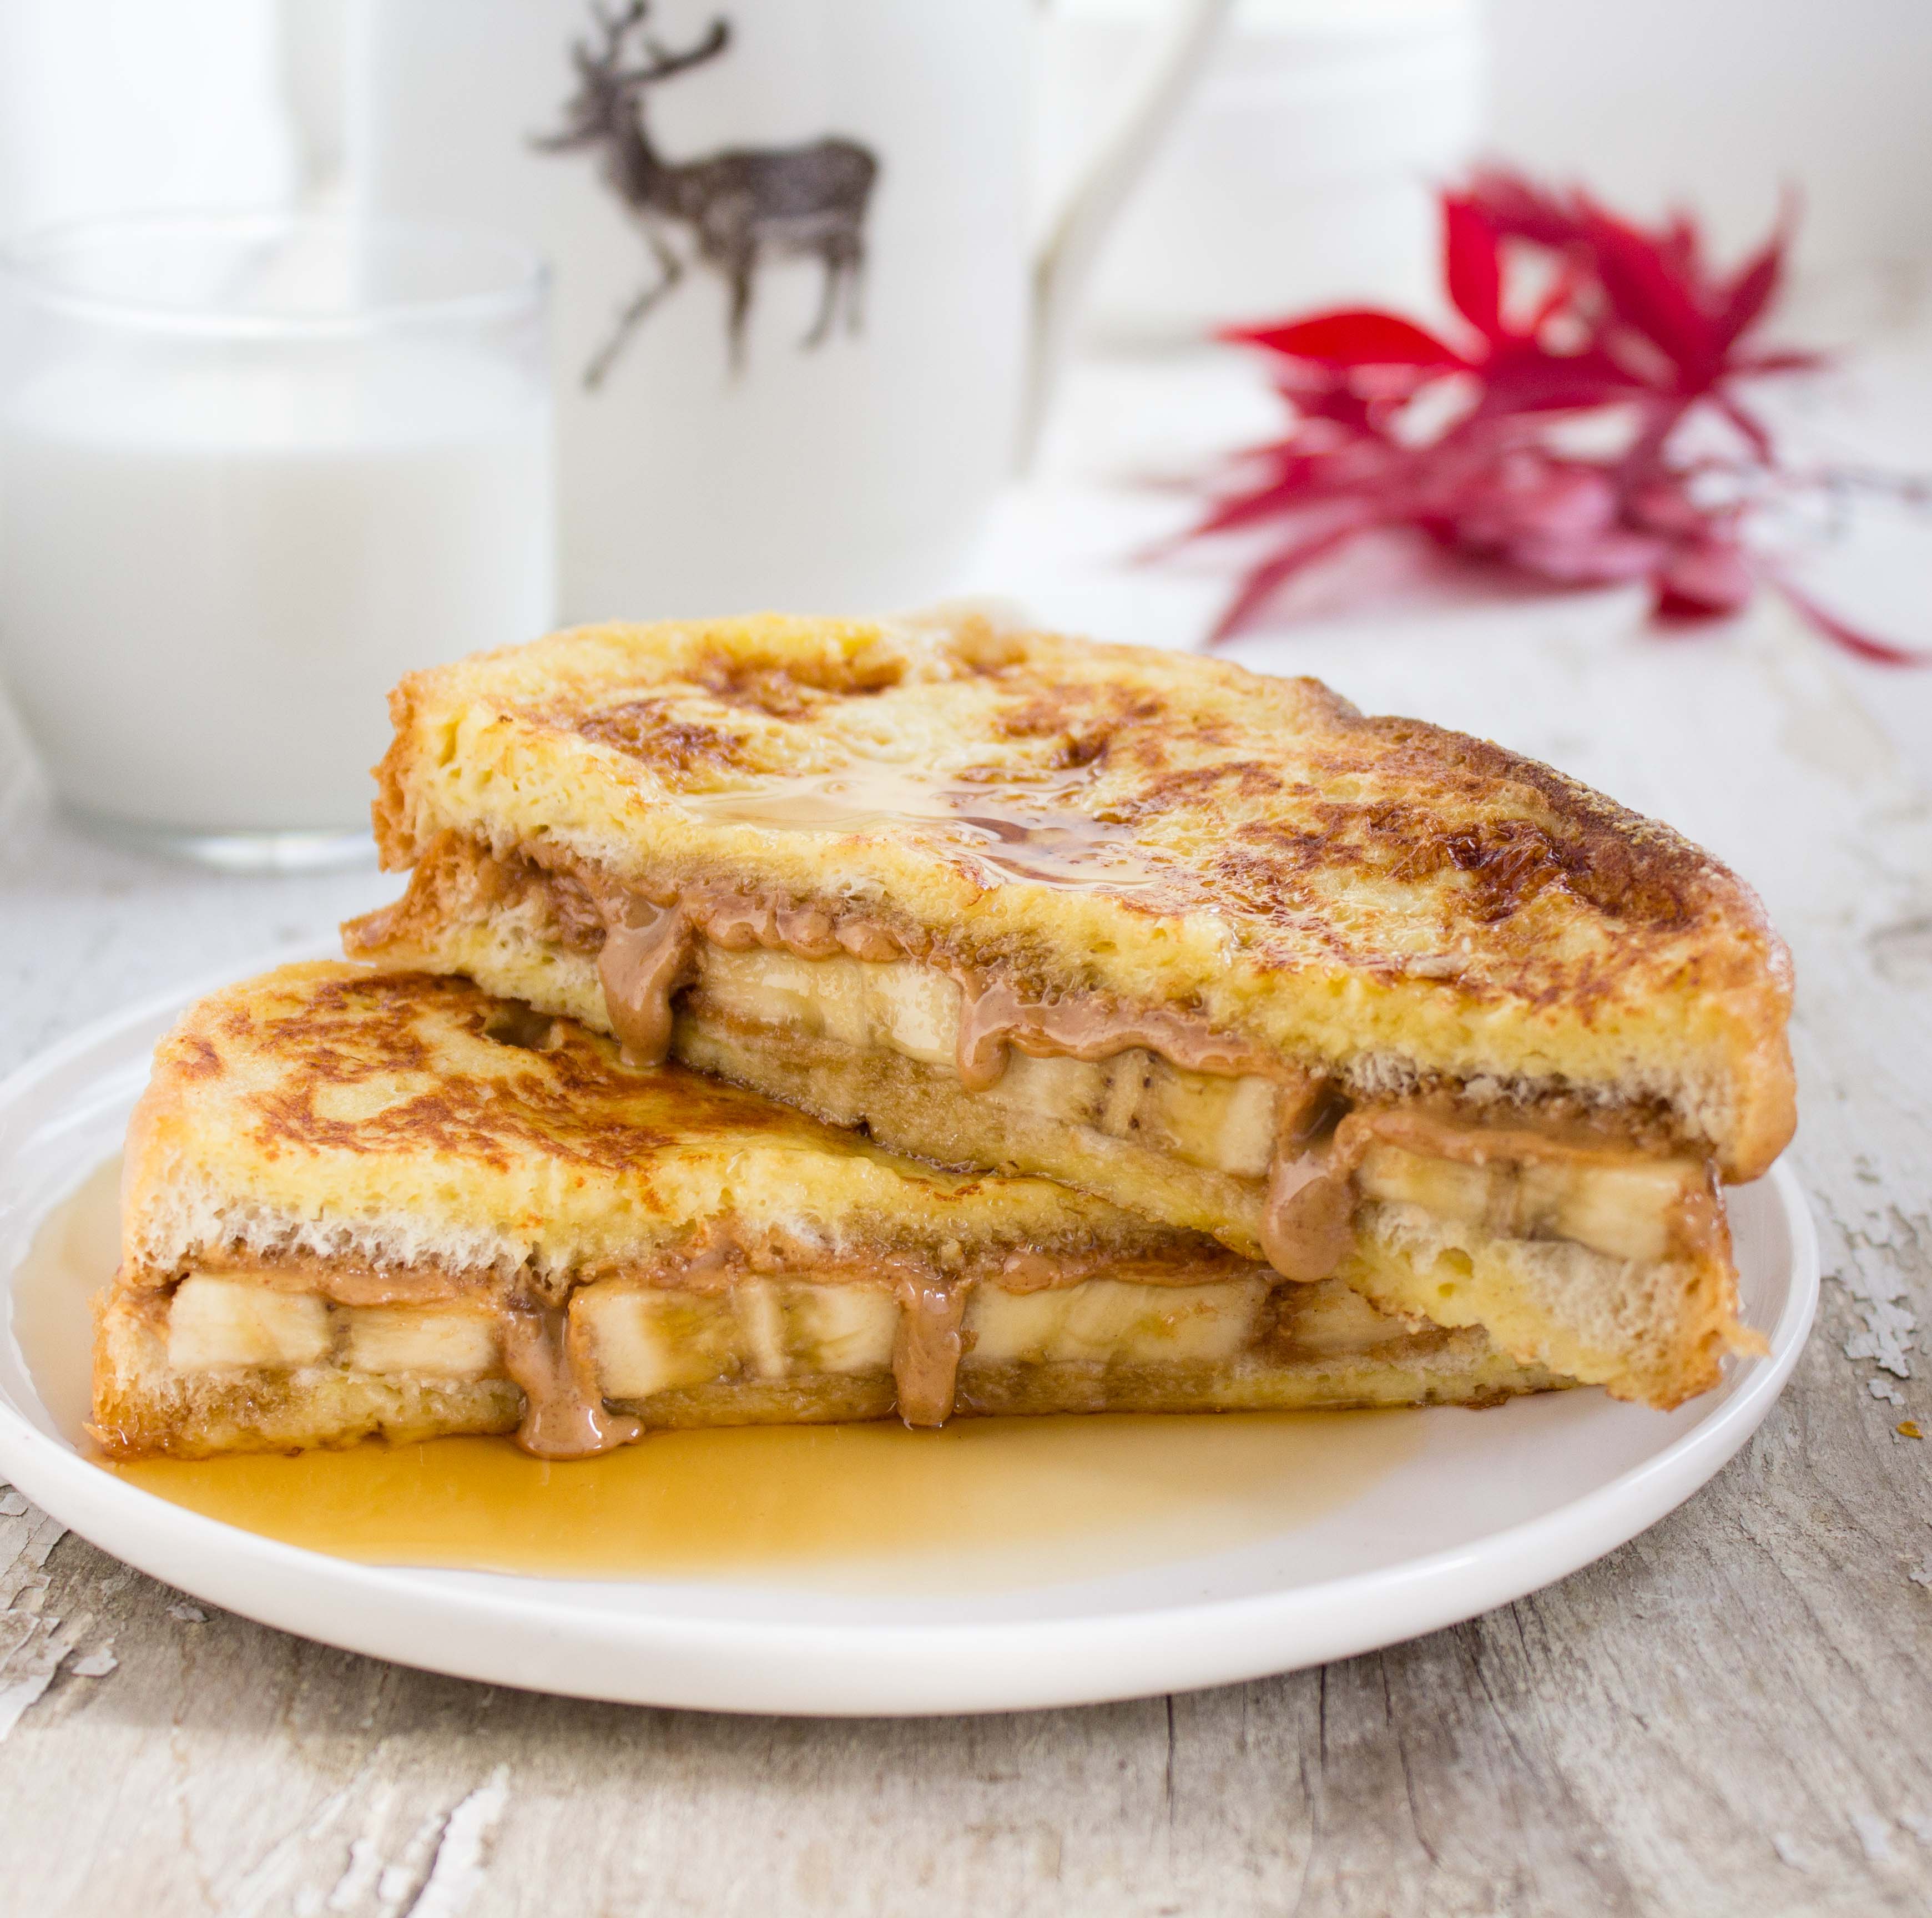 Peanut Butter & Banana Stuffed French Toast - Valerie's Keepers